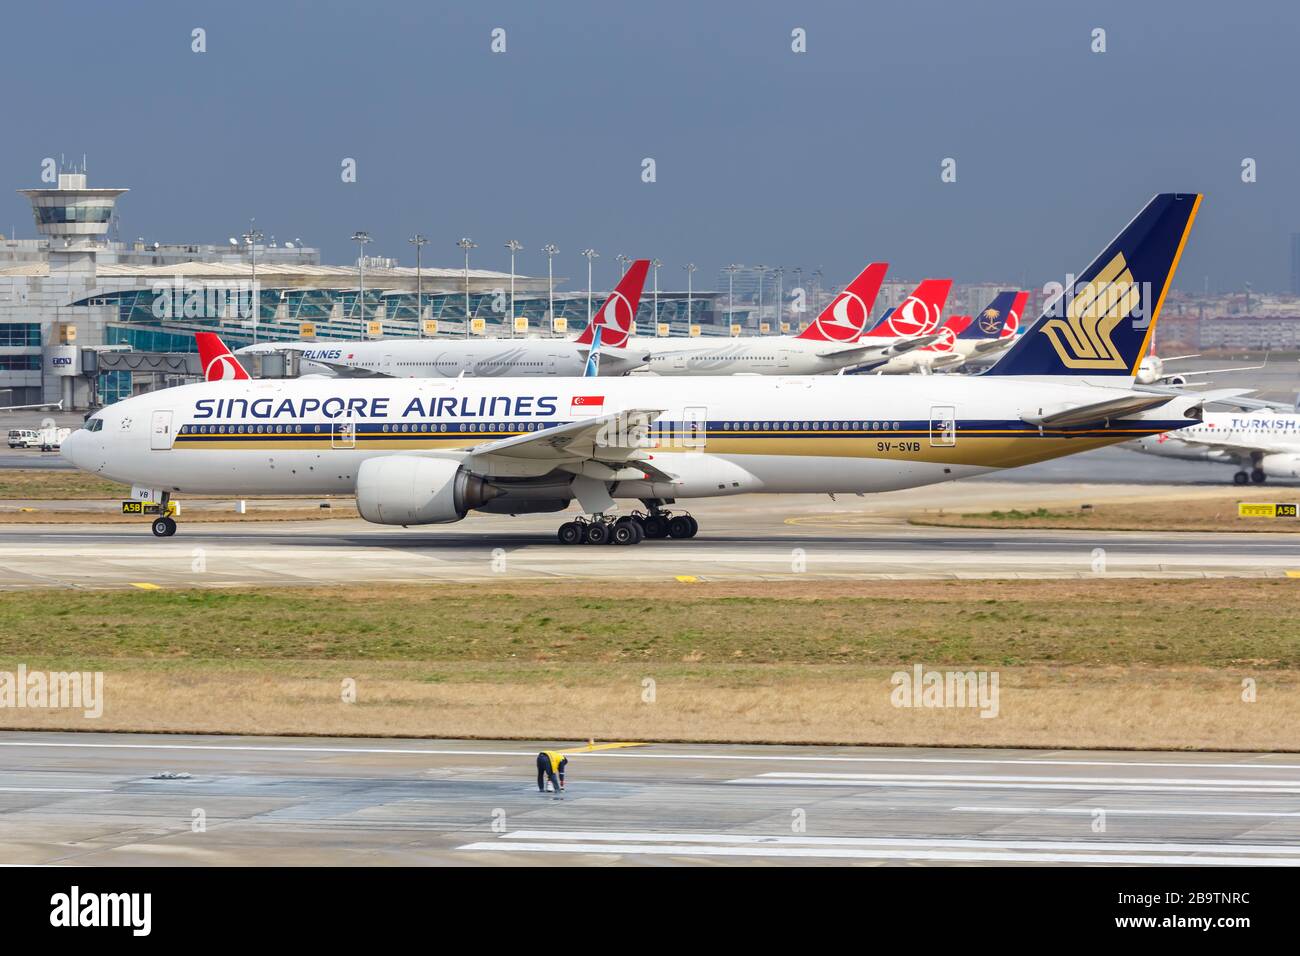 Istanbul, Turkey – February 15, 2019: Singapore Airlines Boeing 777 airplane at Istanbul Ataturk airport (IST) in Turkey. Boeing is an American aircra Stock Photo